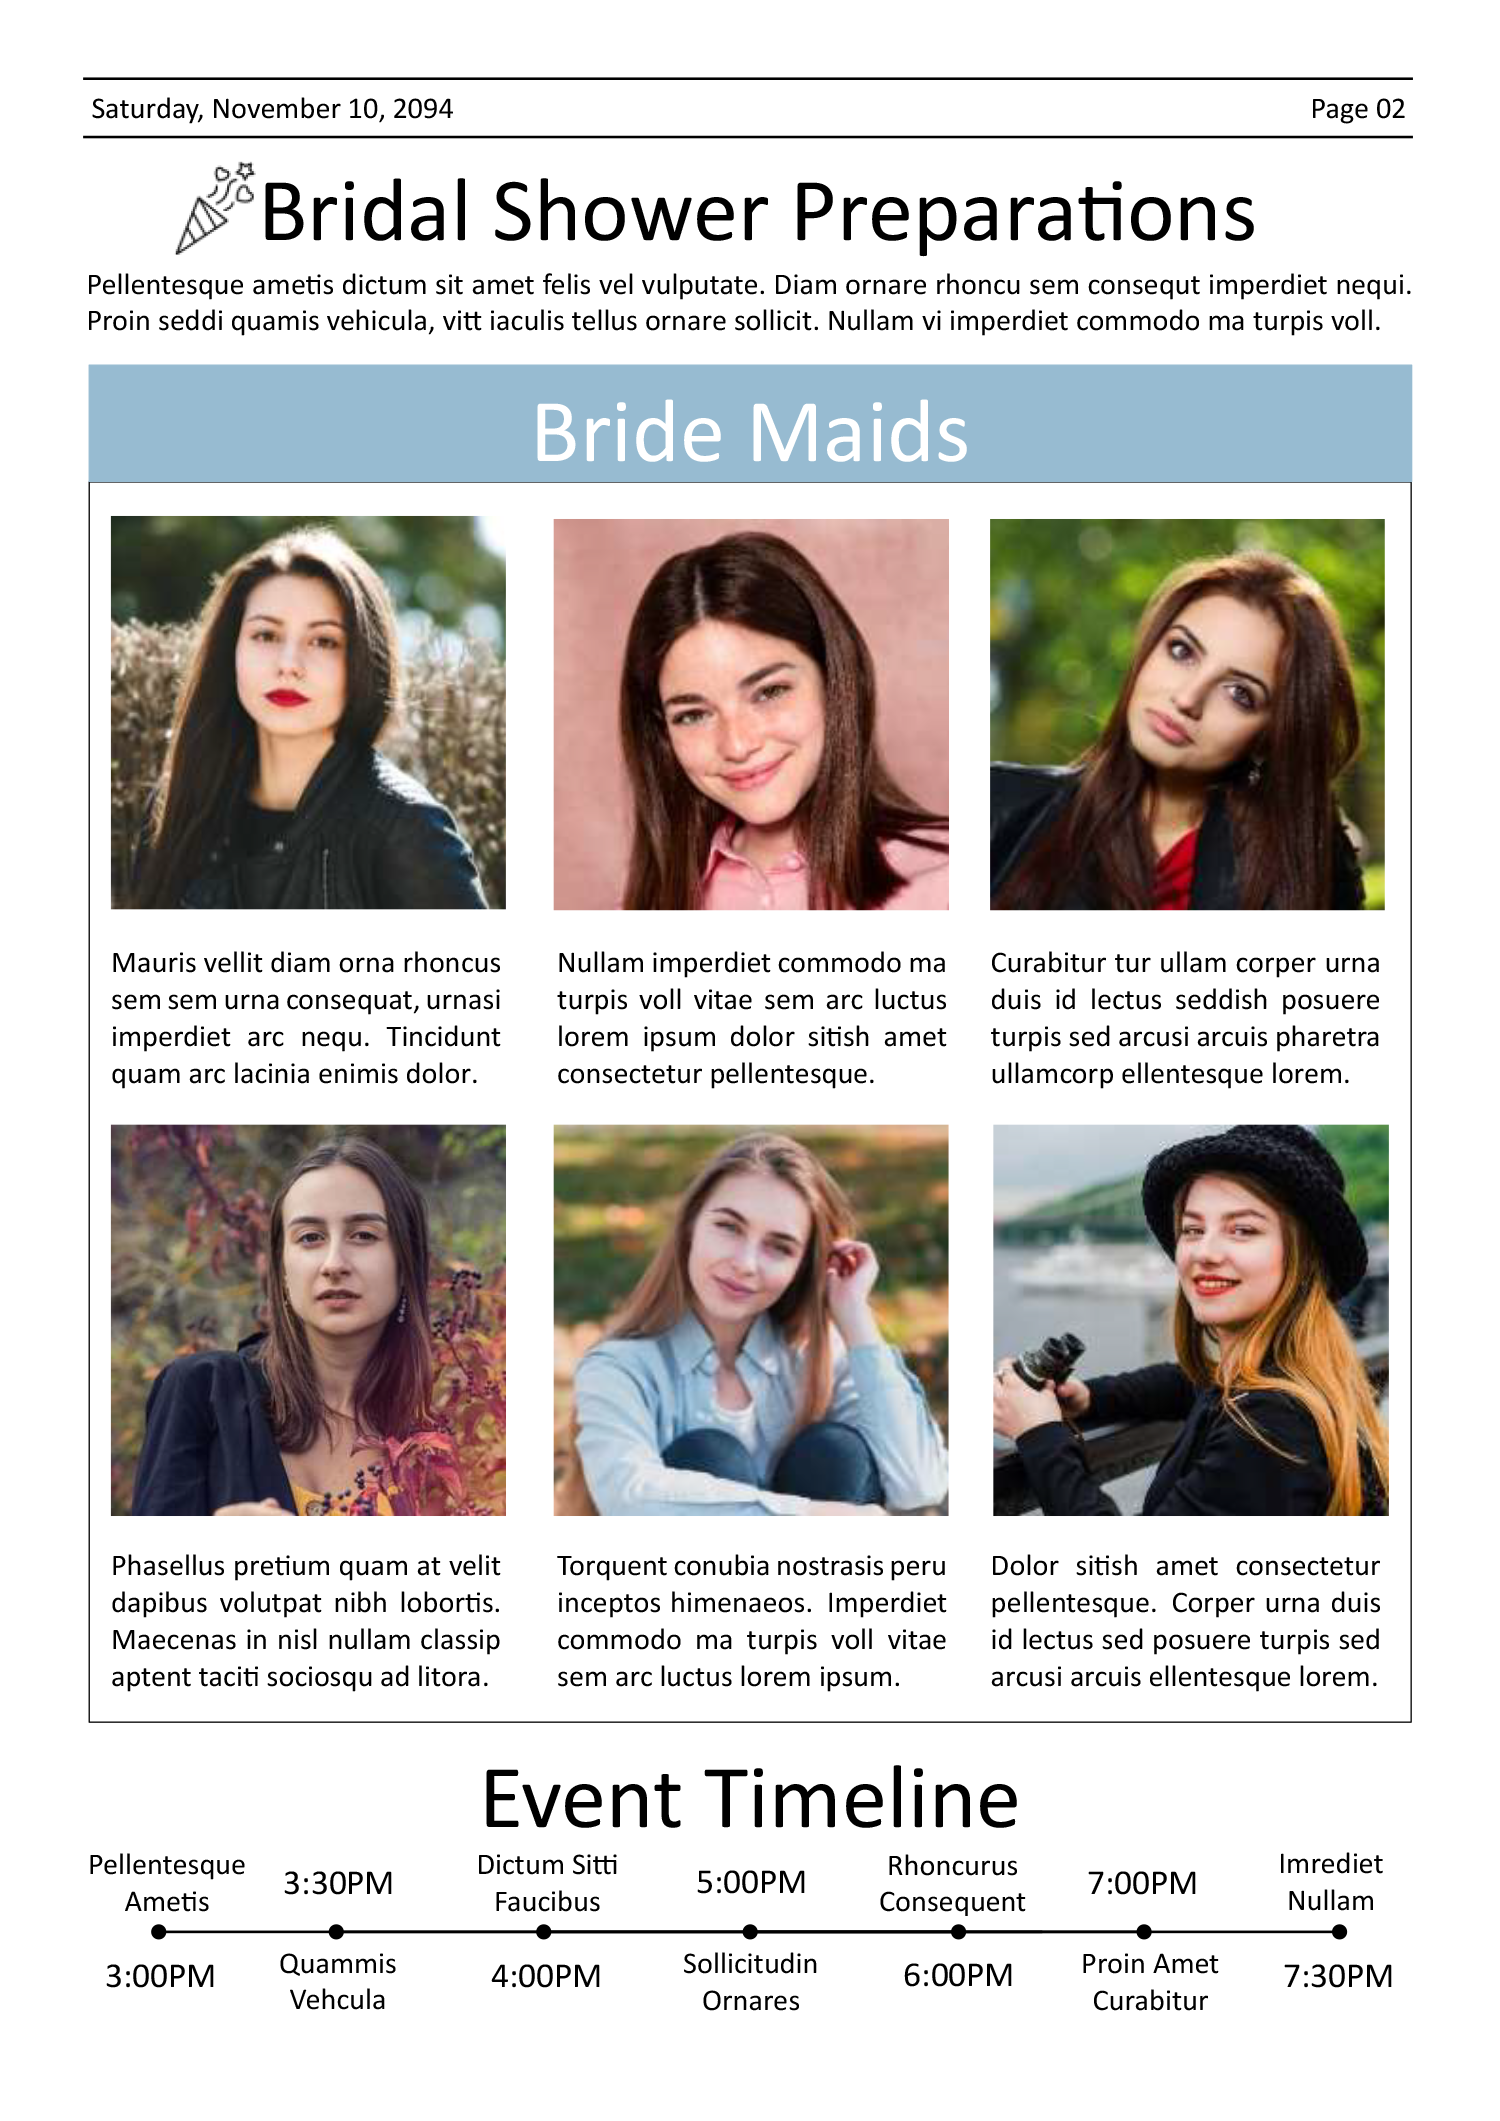 Bridal Shower Newspaper Template - Page 02